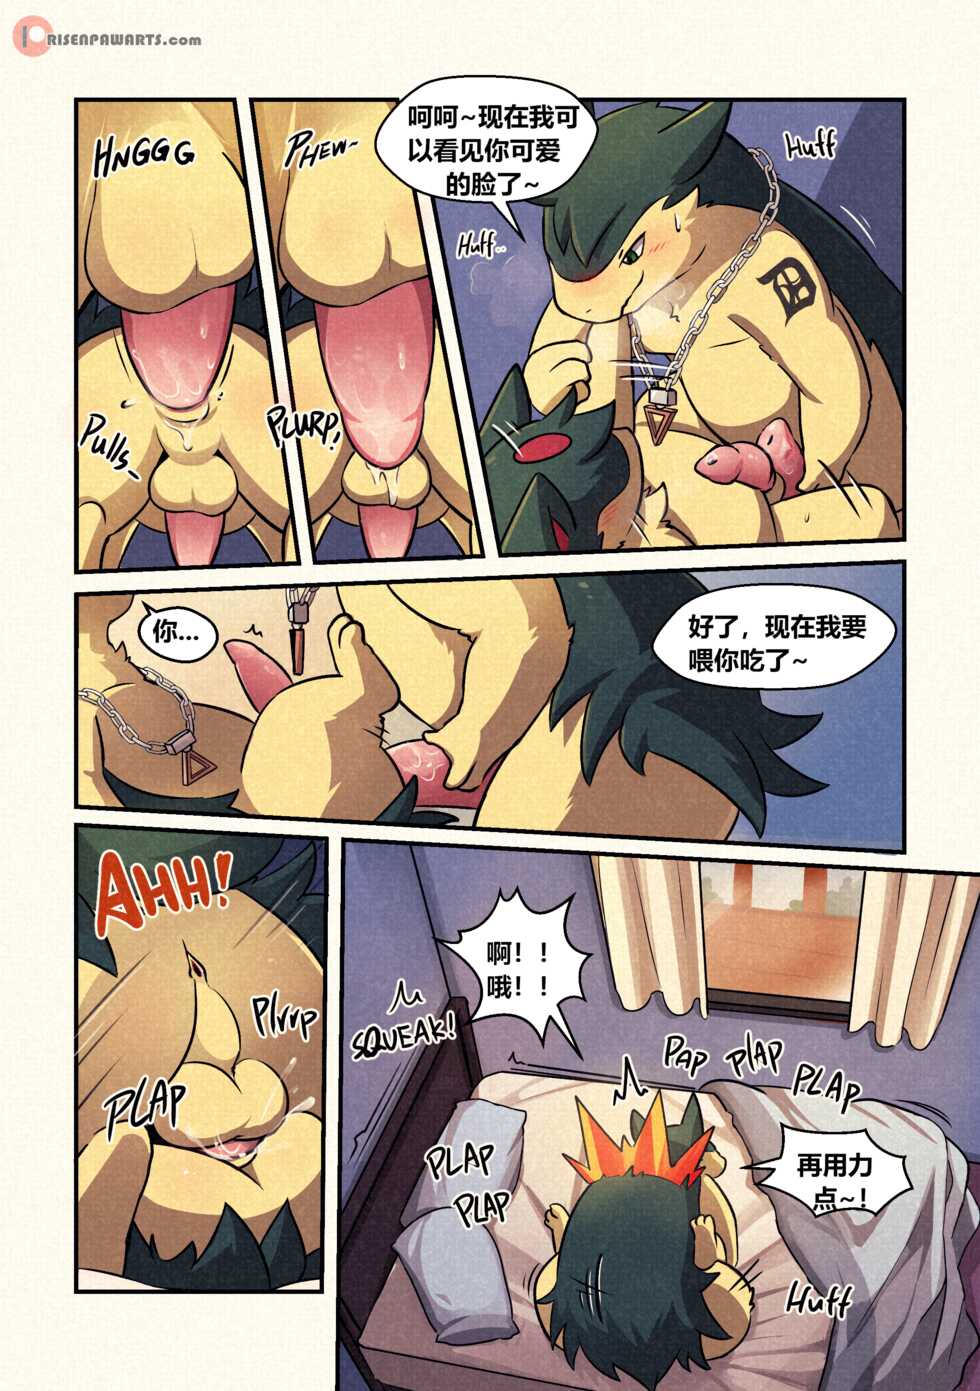 [Risenpaw] Shadow of the Flame - 焰下之影[Bx10ear个人汉化] - Page 22